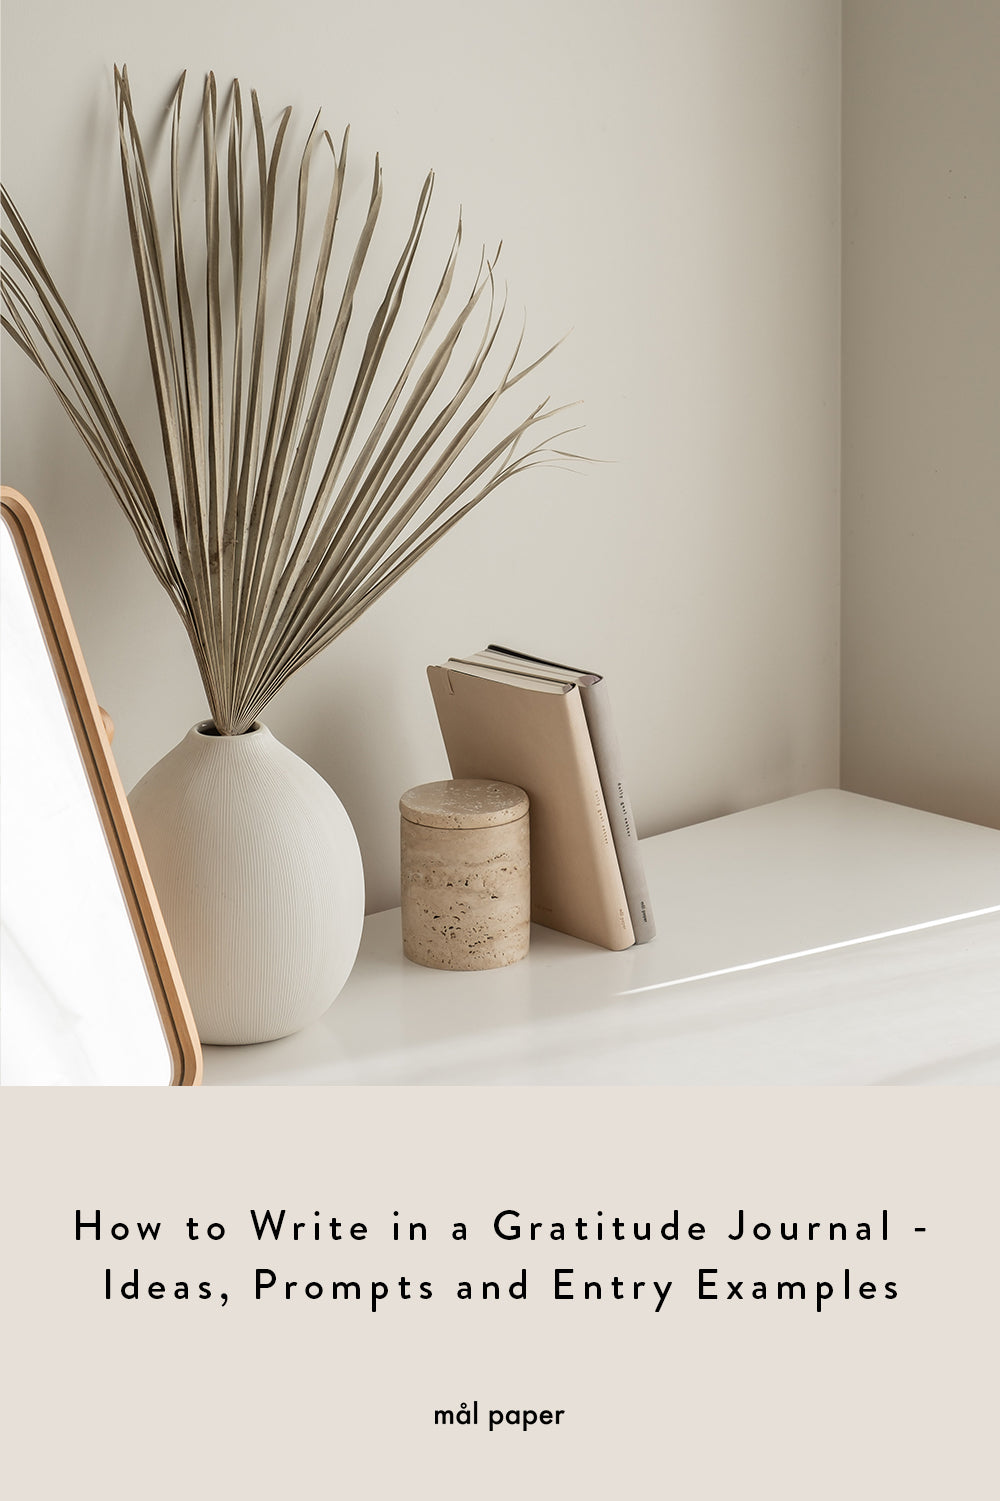 How to Write in a Gratitude Journal - Ideas, Prompts and Entry Examples